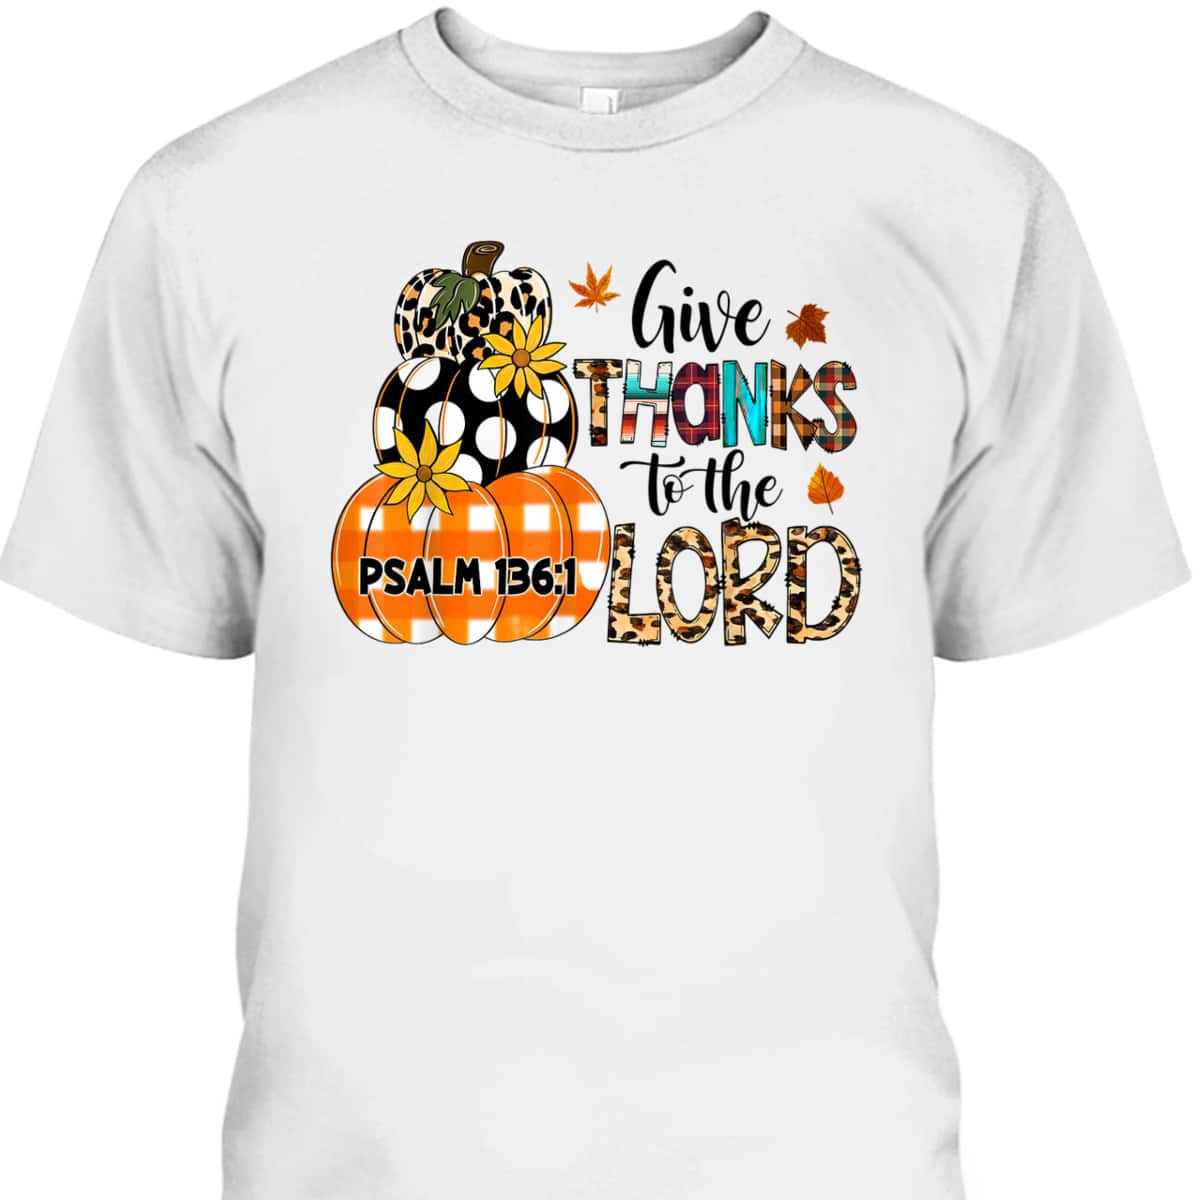 Give Thanks To The Lord Christian Bible Verse Thanksgiving Holiday Plaid T-Shirt